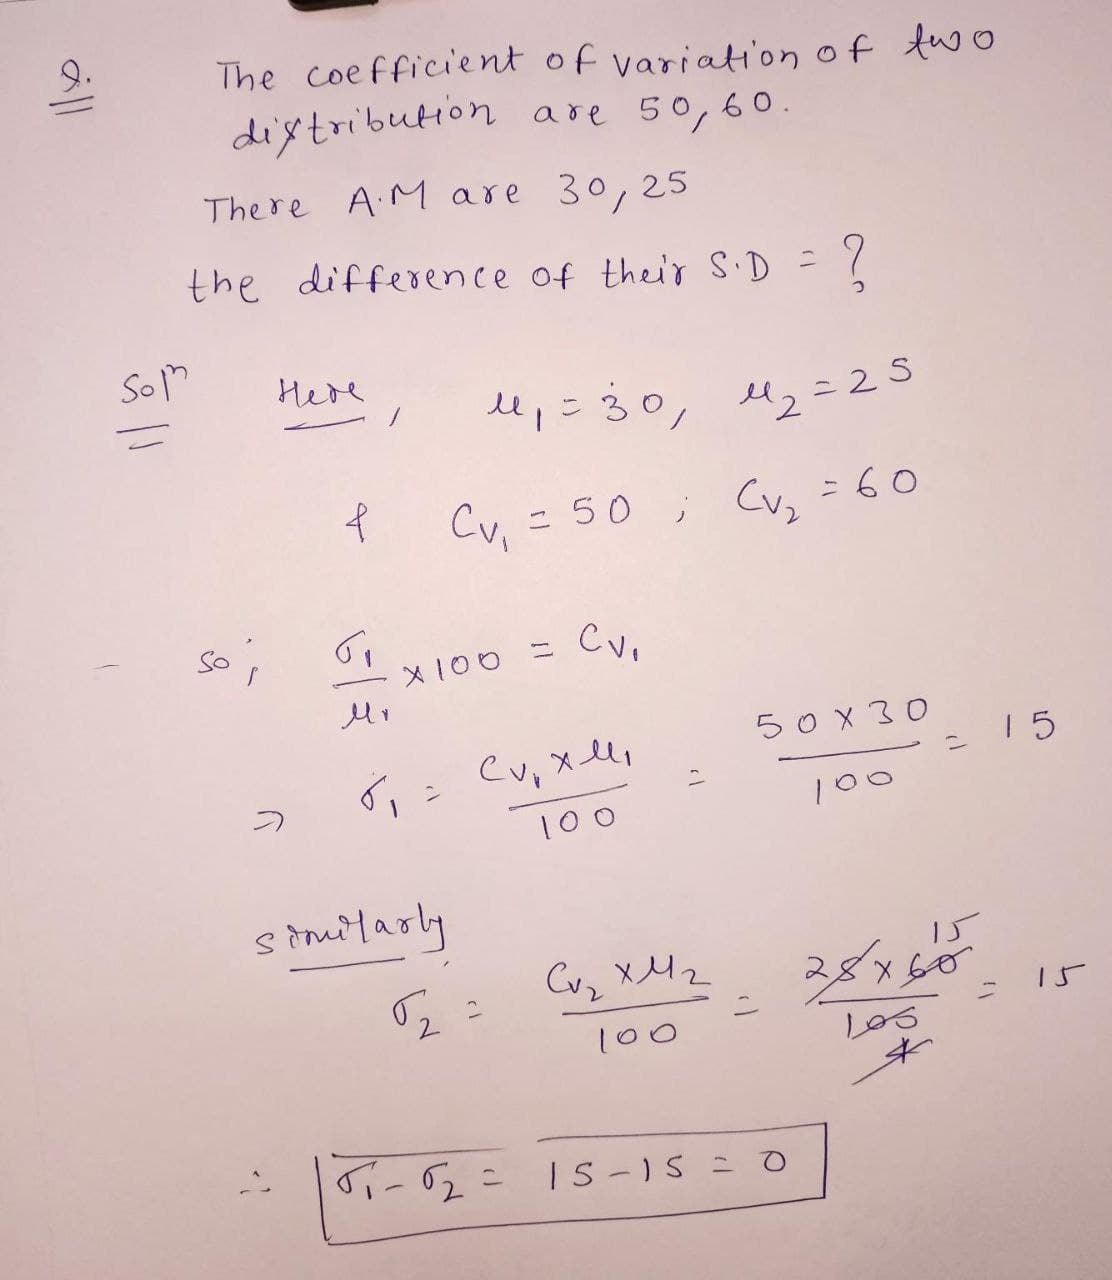 9.
The coefficient of variation of tuo
distribution are 50,60.
There A.M are 30,25
the difference of their S.D =
Son
Here
e,こ30, u2=25
Cv, = 50 ; Cv, =60
so;
ニ
X100
50 X 30
Cu, xlli
1 5
100
100
s tmitarly
15
Cvz xMz
6o
%3D
100
IS-)S = O
all
